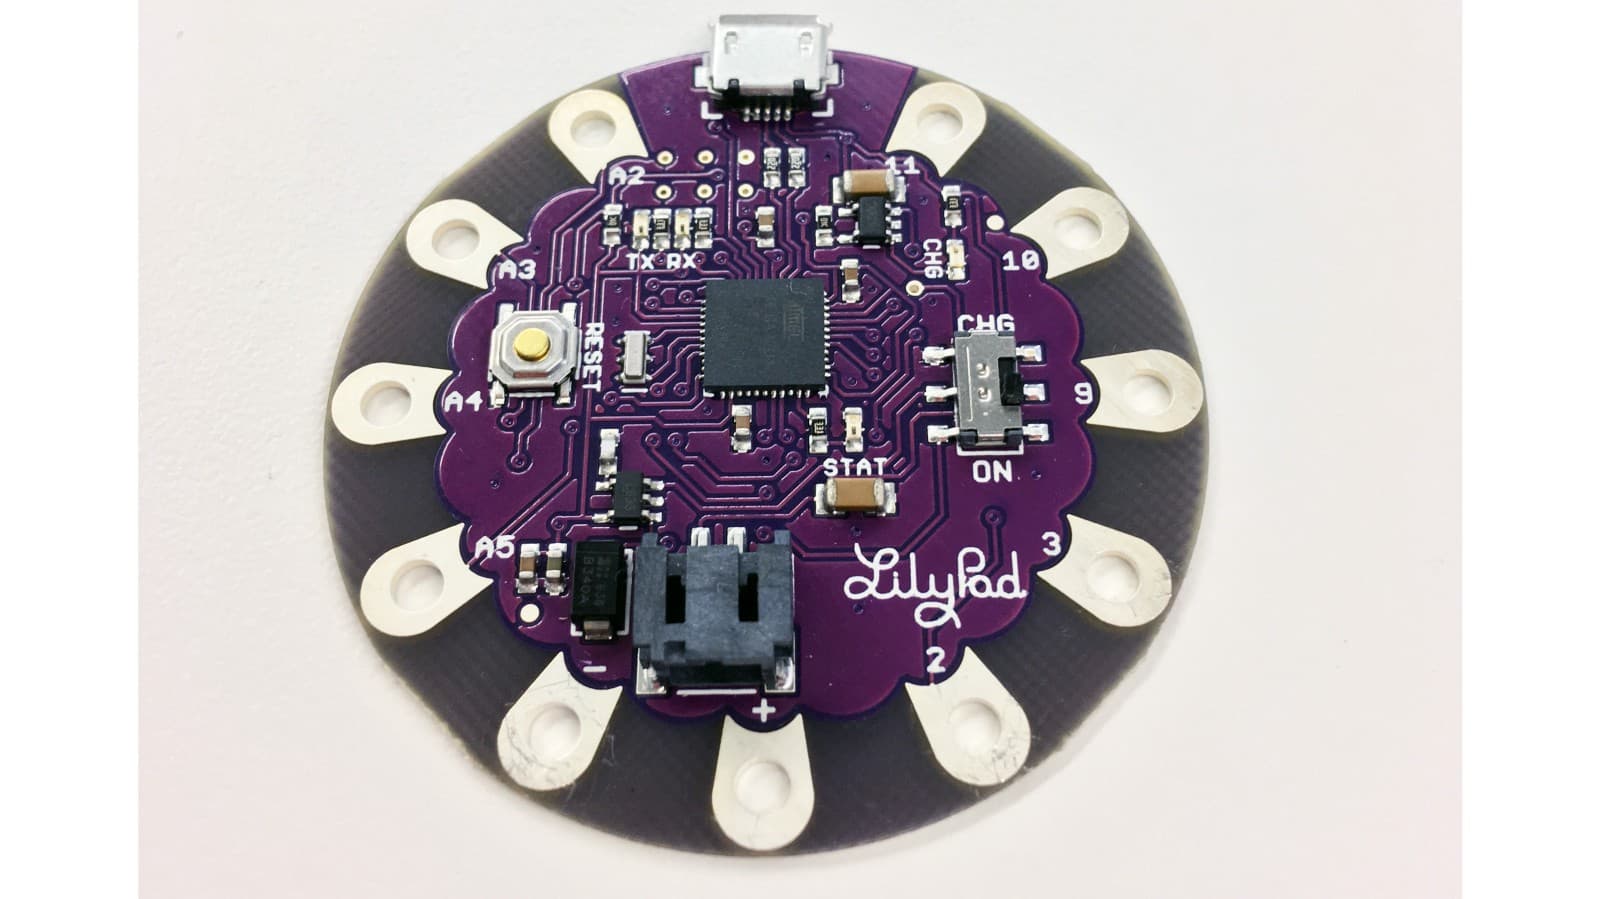 A photo of the LilyPad Arduino